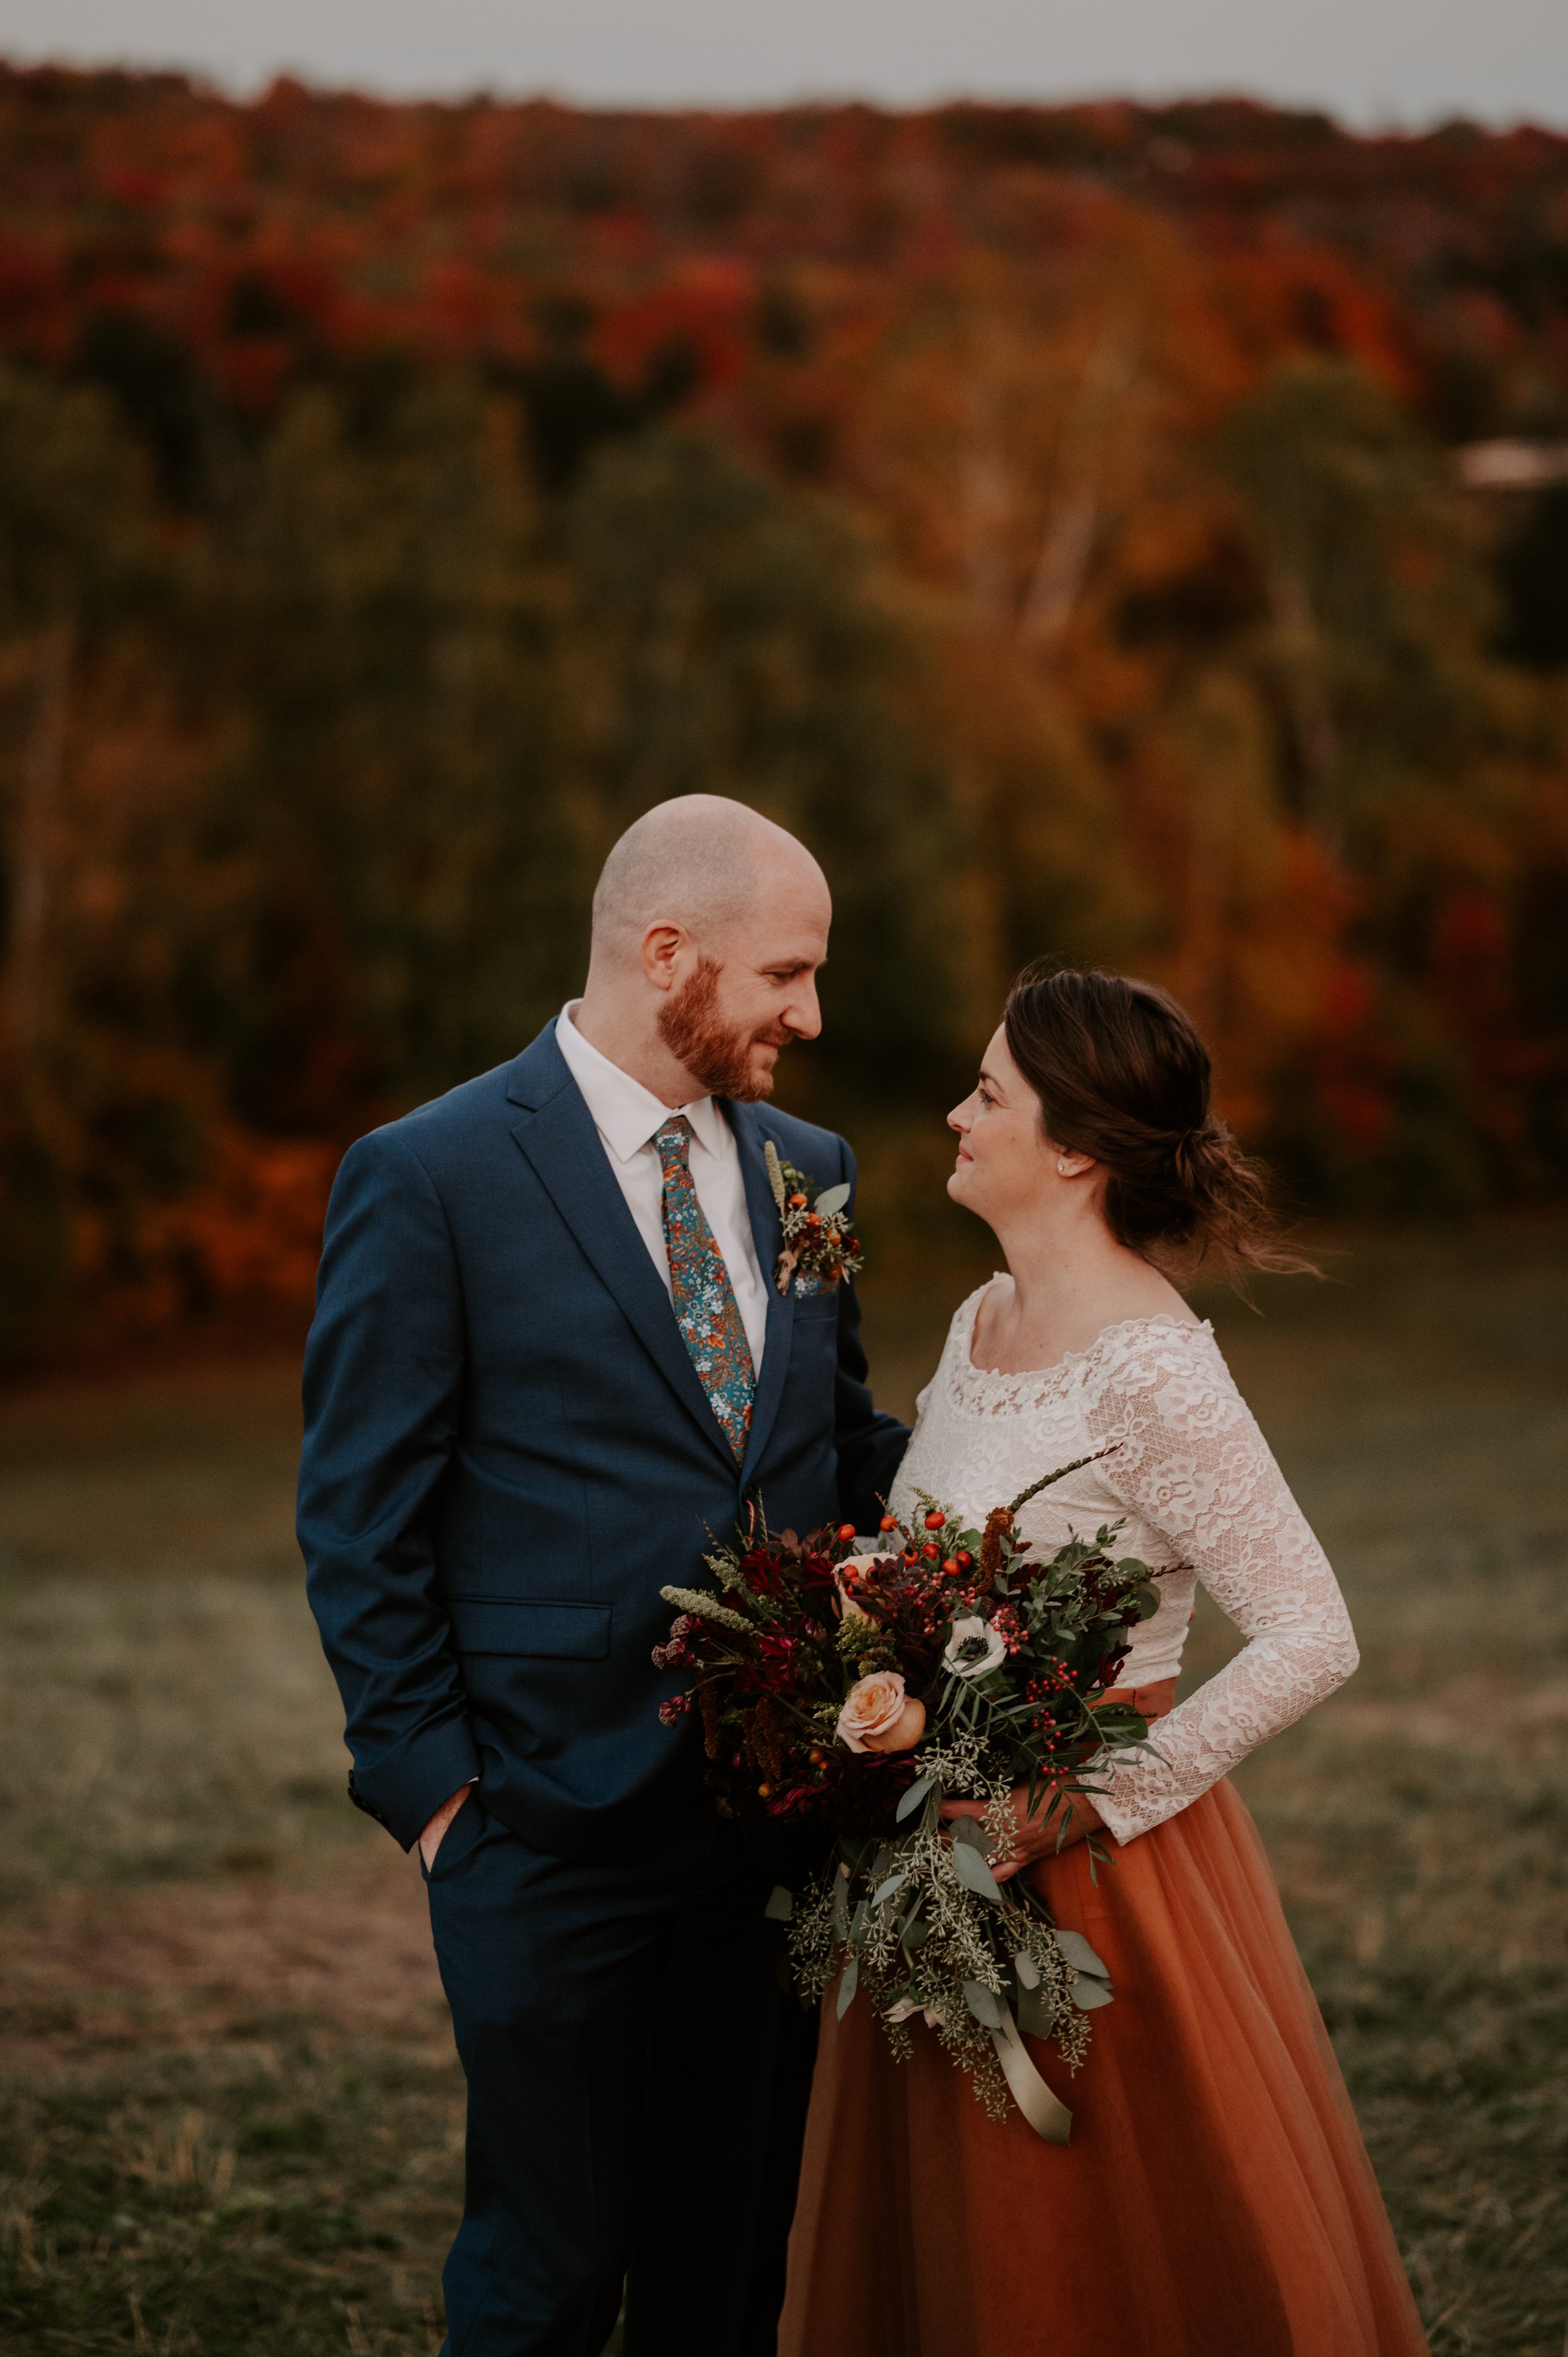 Fall elopements in Vermont. Stowe Vermont wedding and elopement photographer. Stowe Vermont wedding photographer. Trapp family lodge wedding photographer. Edson Hill wedding photographer. Topnotch wedding photographer. The Woodstock Inn wedding photographer 